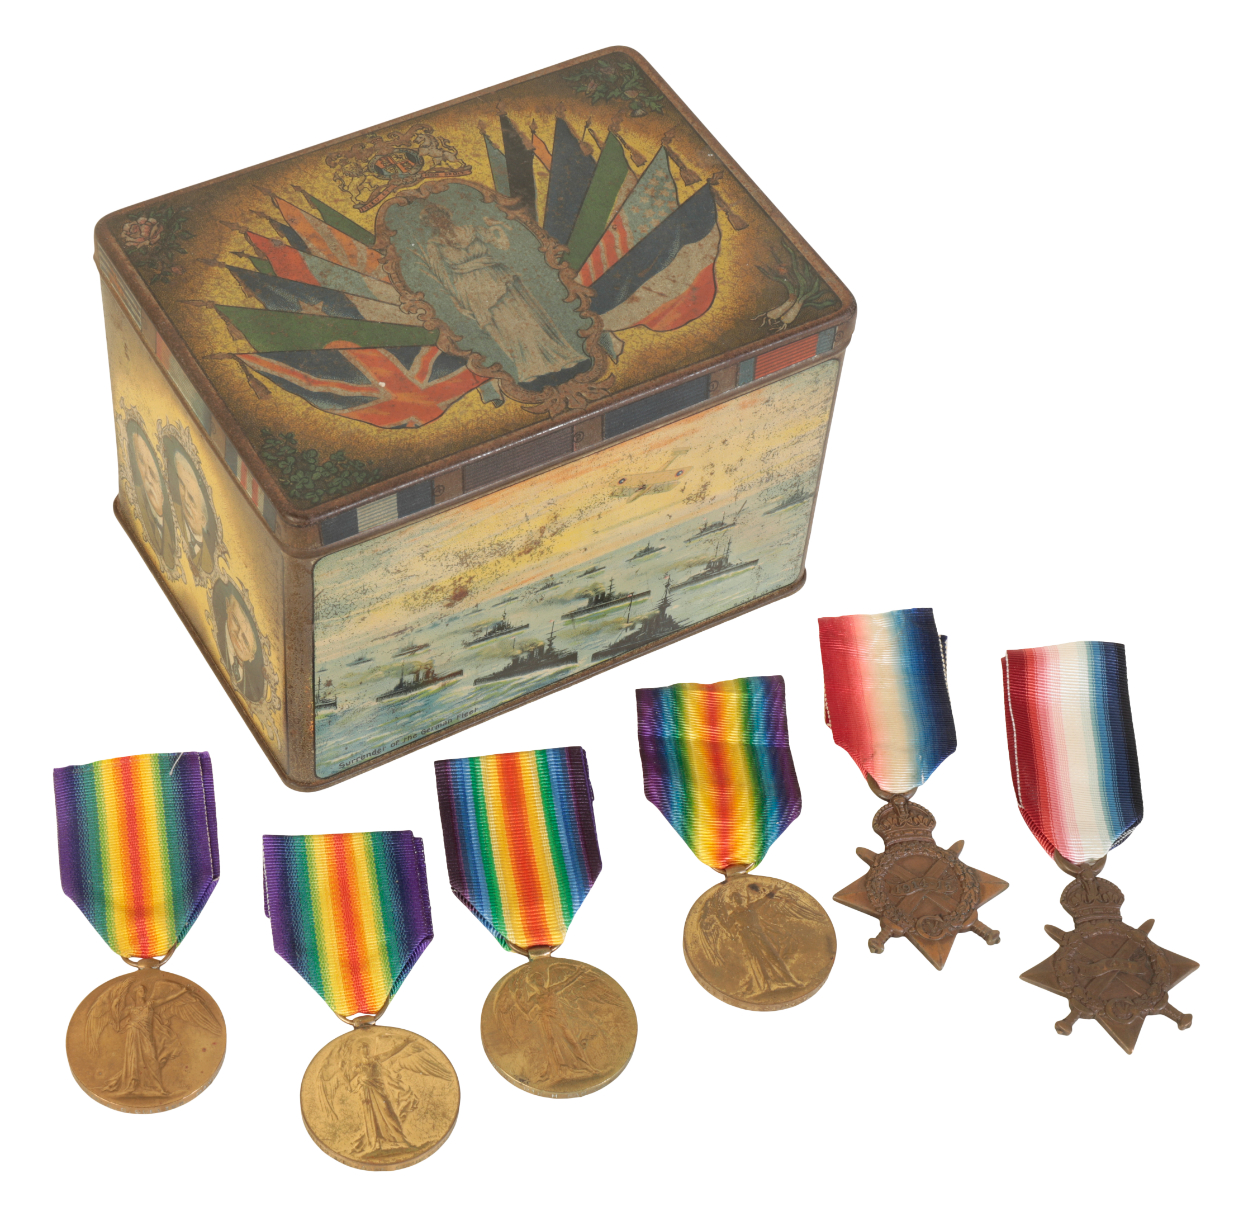 GREAT WAR MEDALS AND A RARE RIDGWAY'S